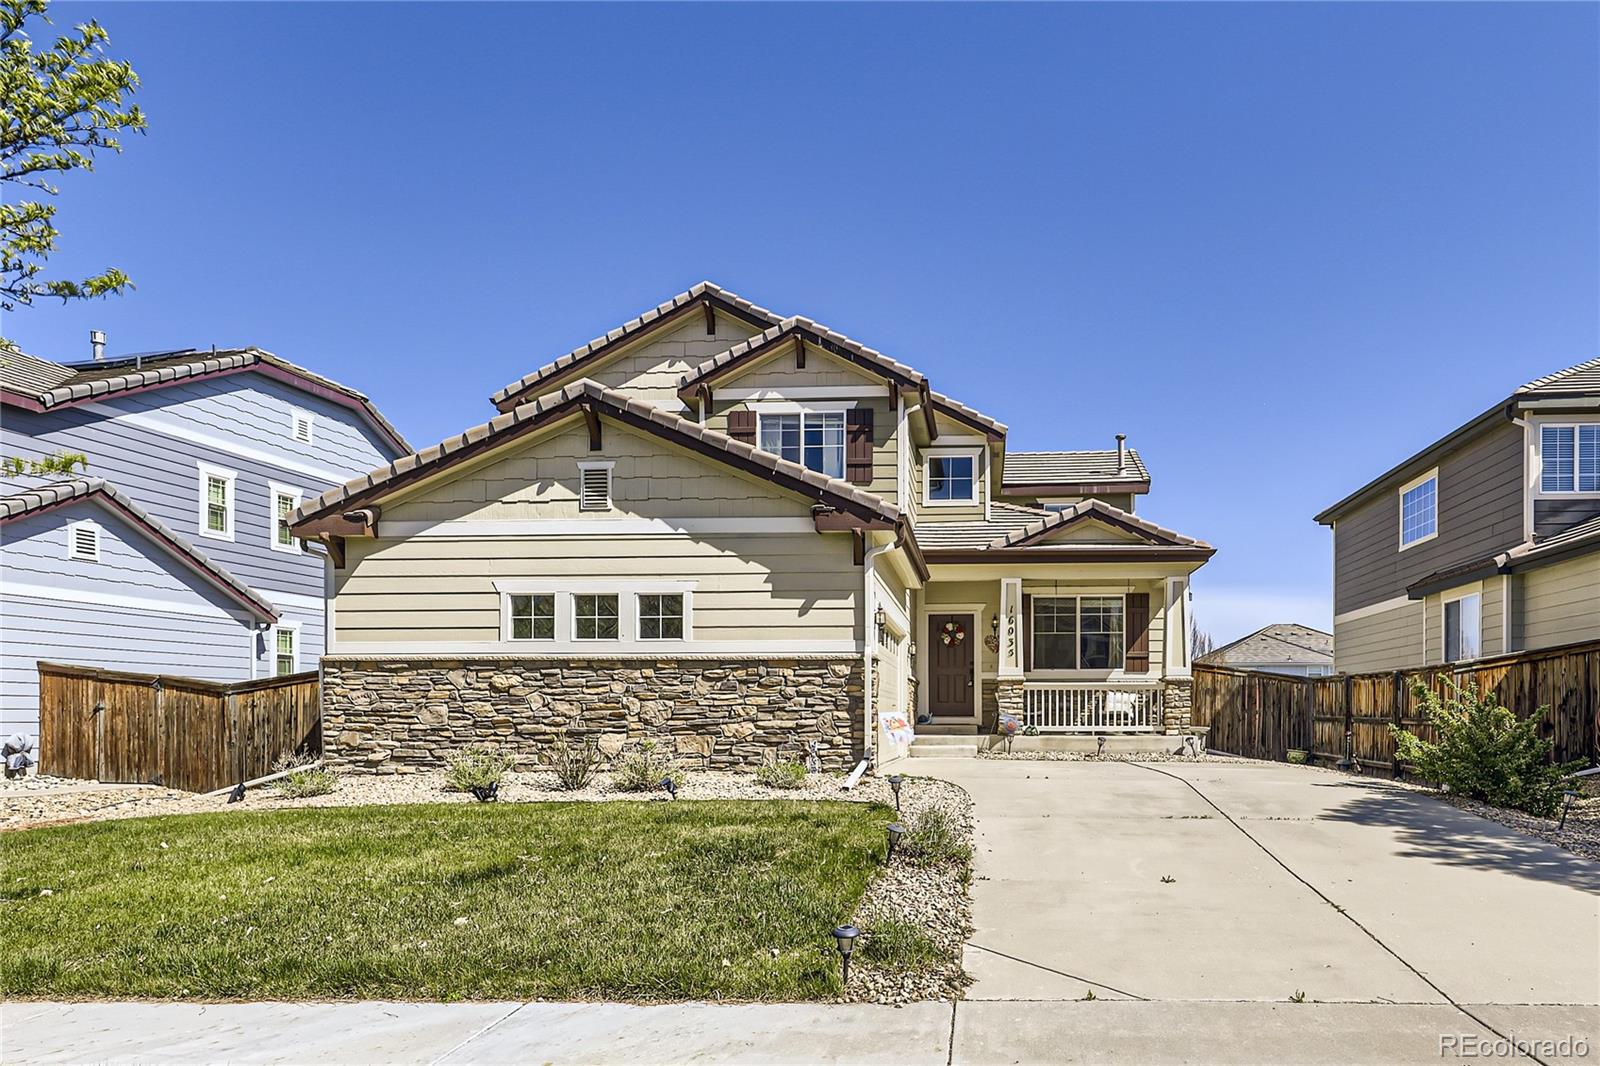 16035 E 107th Place, commerce city MLS: 3223188 Beds: 5 Baths: 4 Price: $635,000